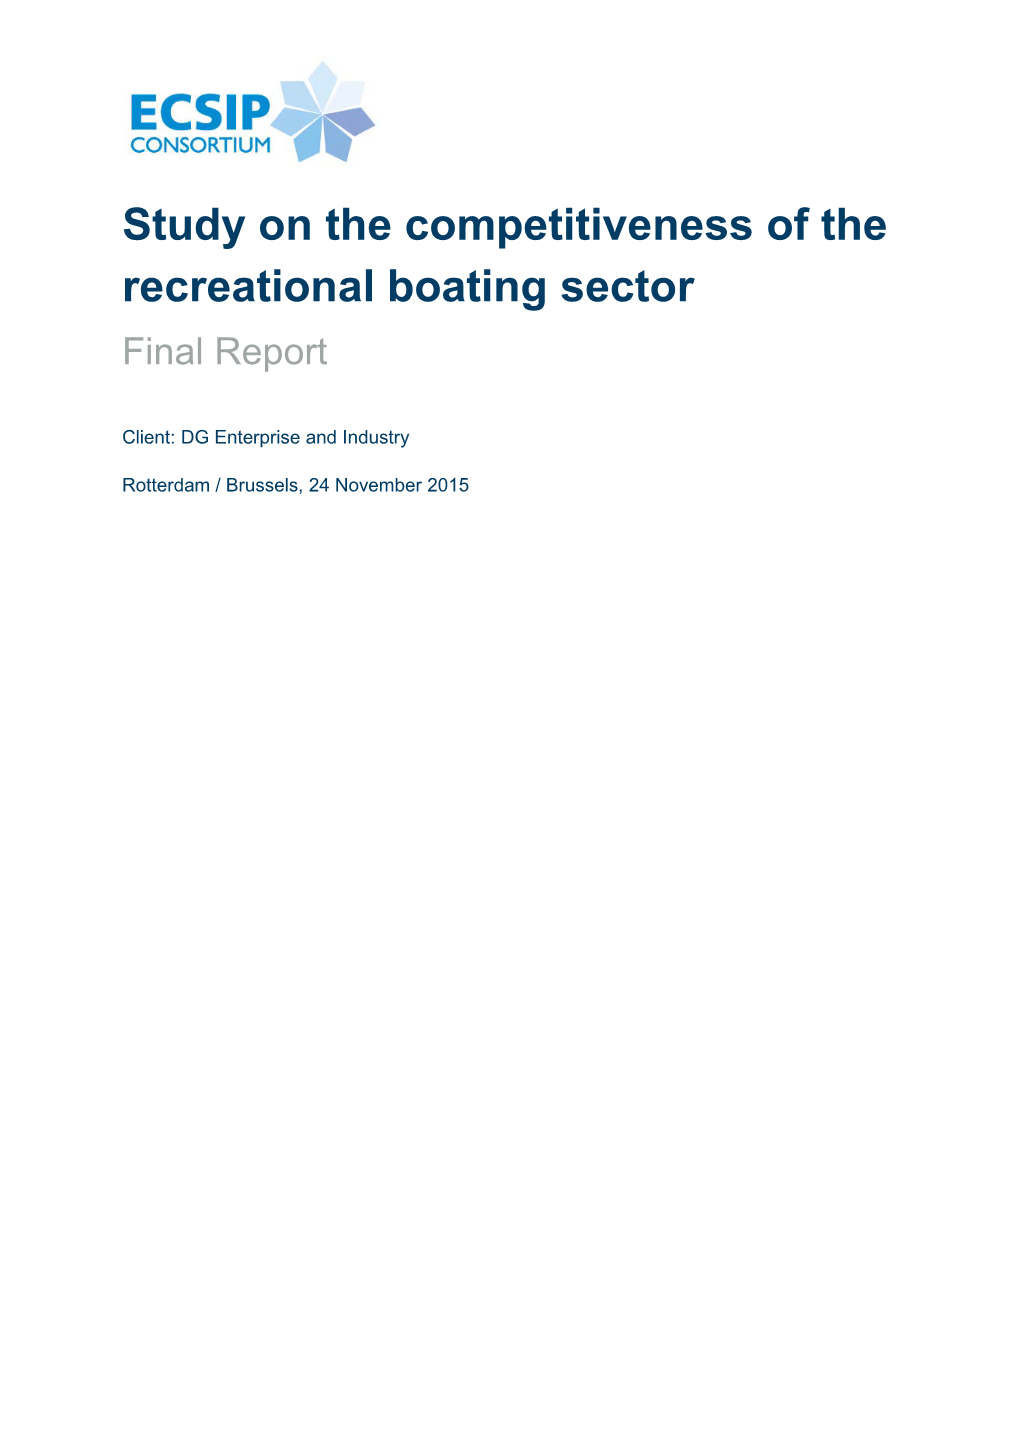 Study on the Competitiveness of the Recreational Boating Sector Final Report